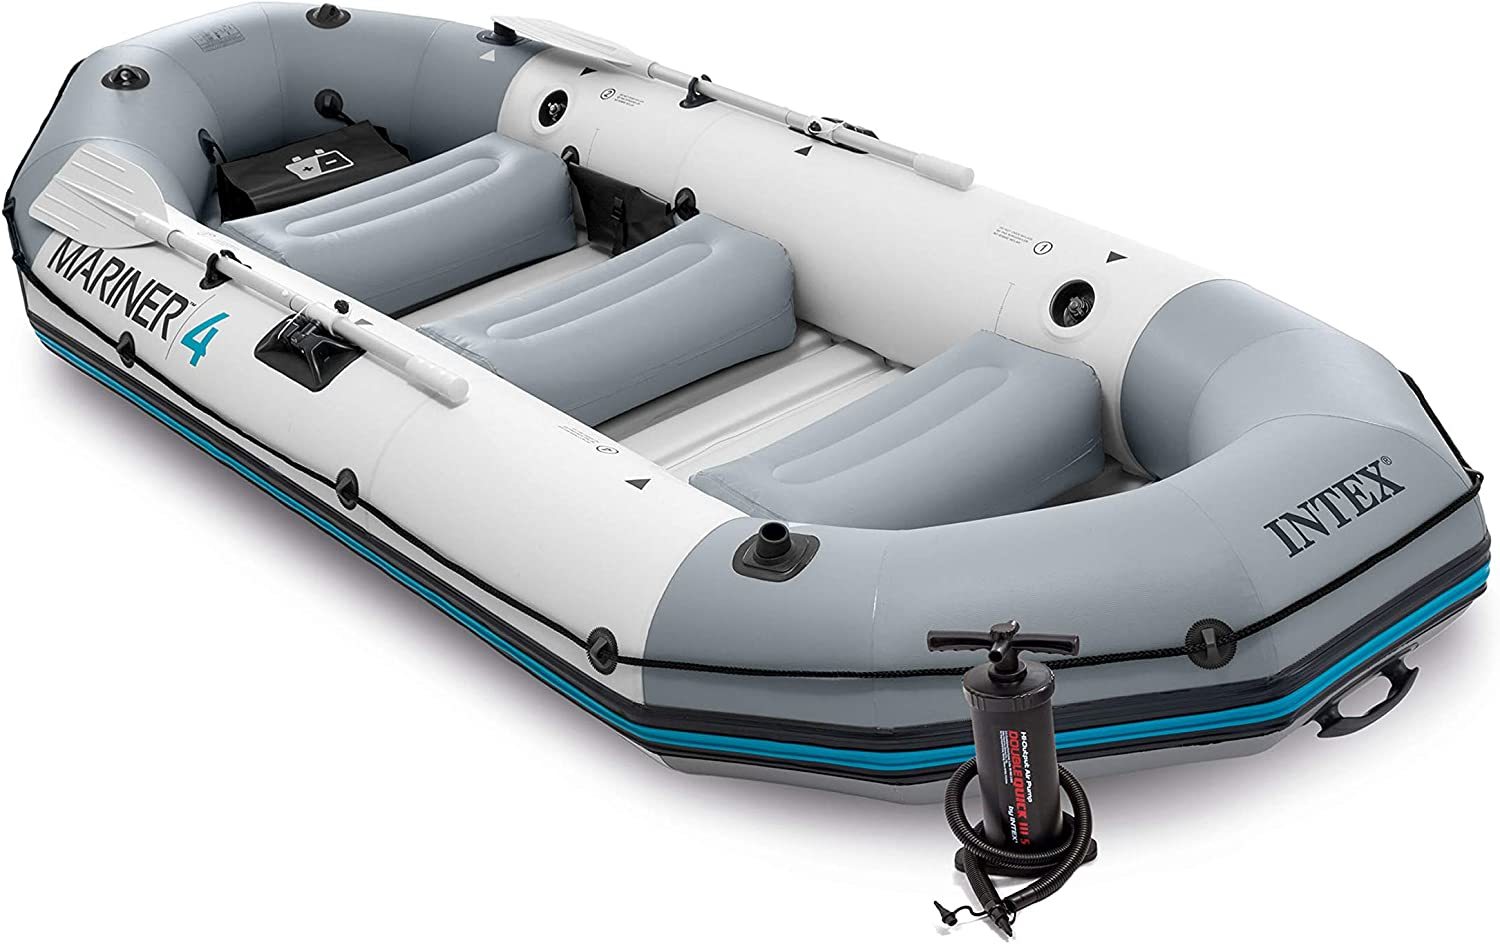 Primary image for Intex Mariner Inflatable Boat Set Series